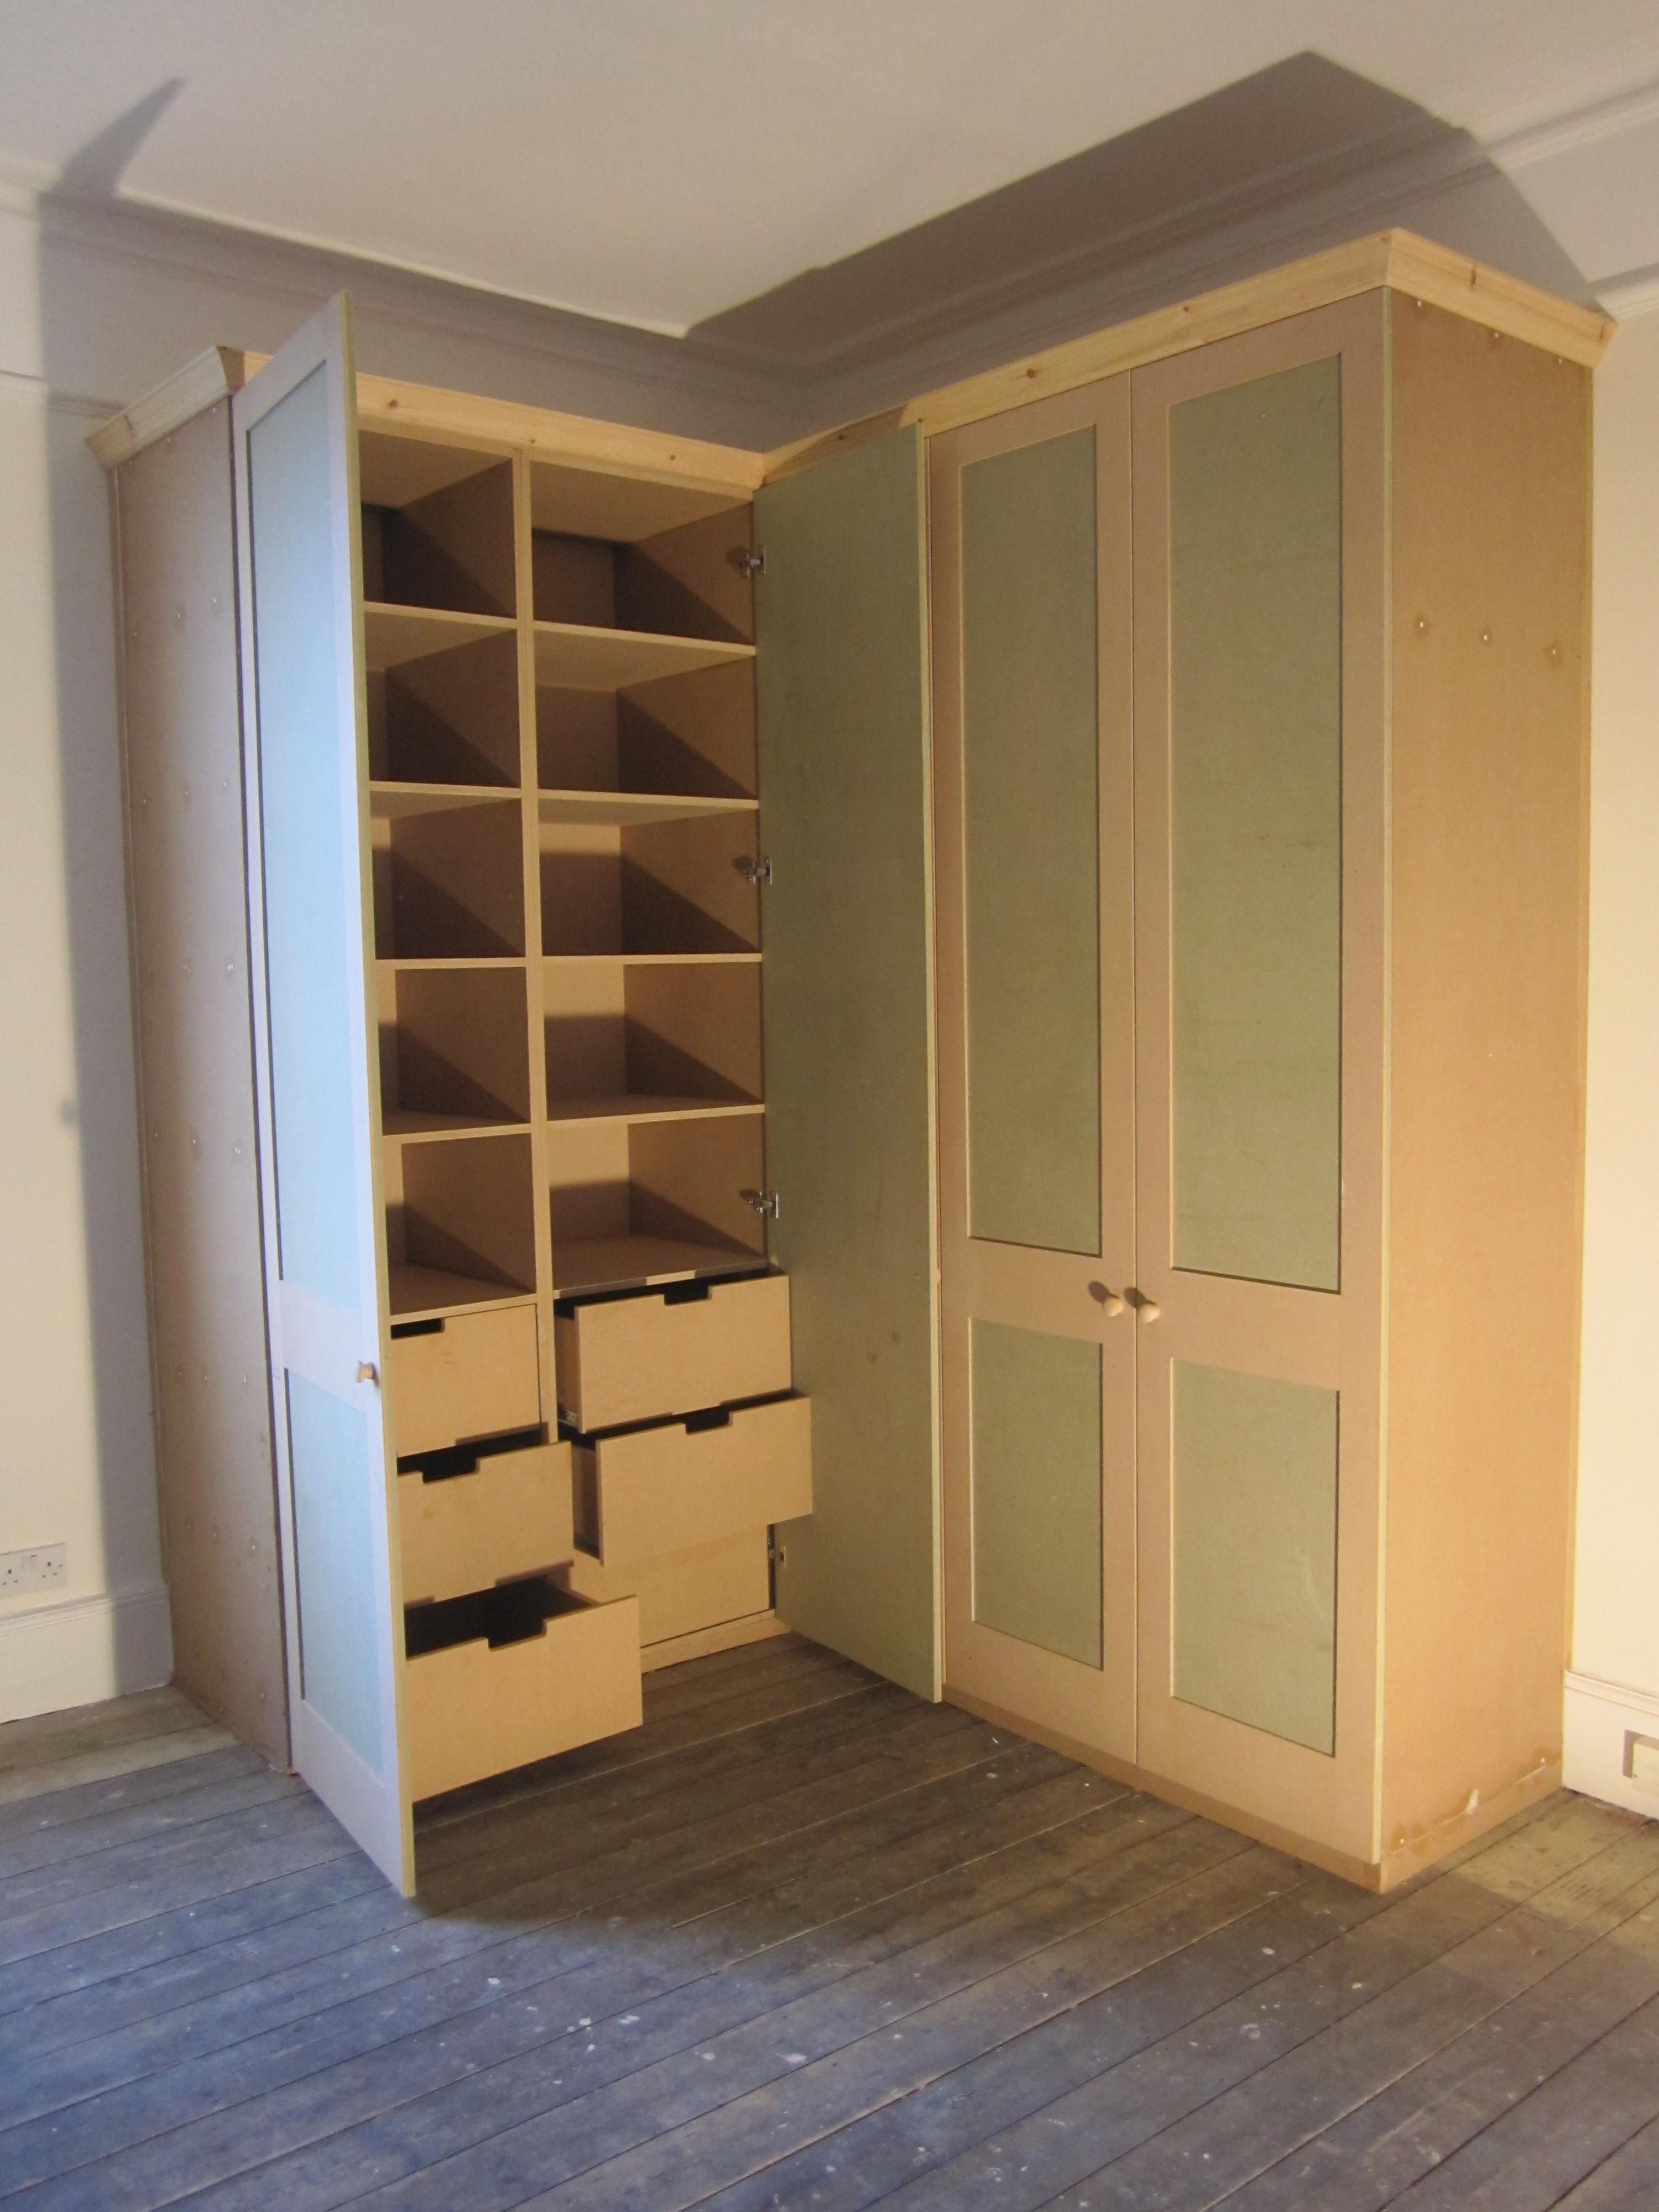 For Idea Of Drawer Shape Only Closets Pinterest Drawers And Inside Wardrobes With Shelves (Photo 14 of 15)